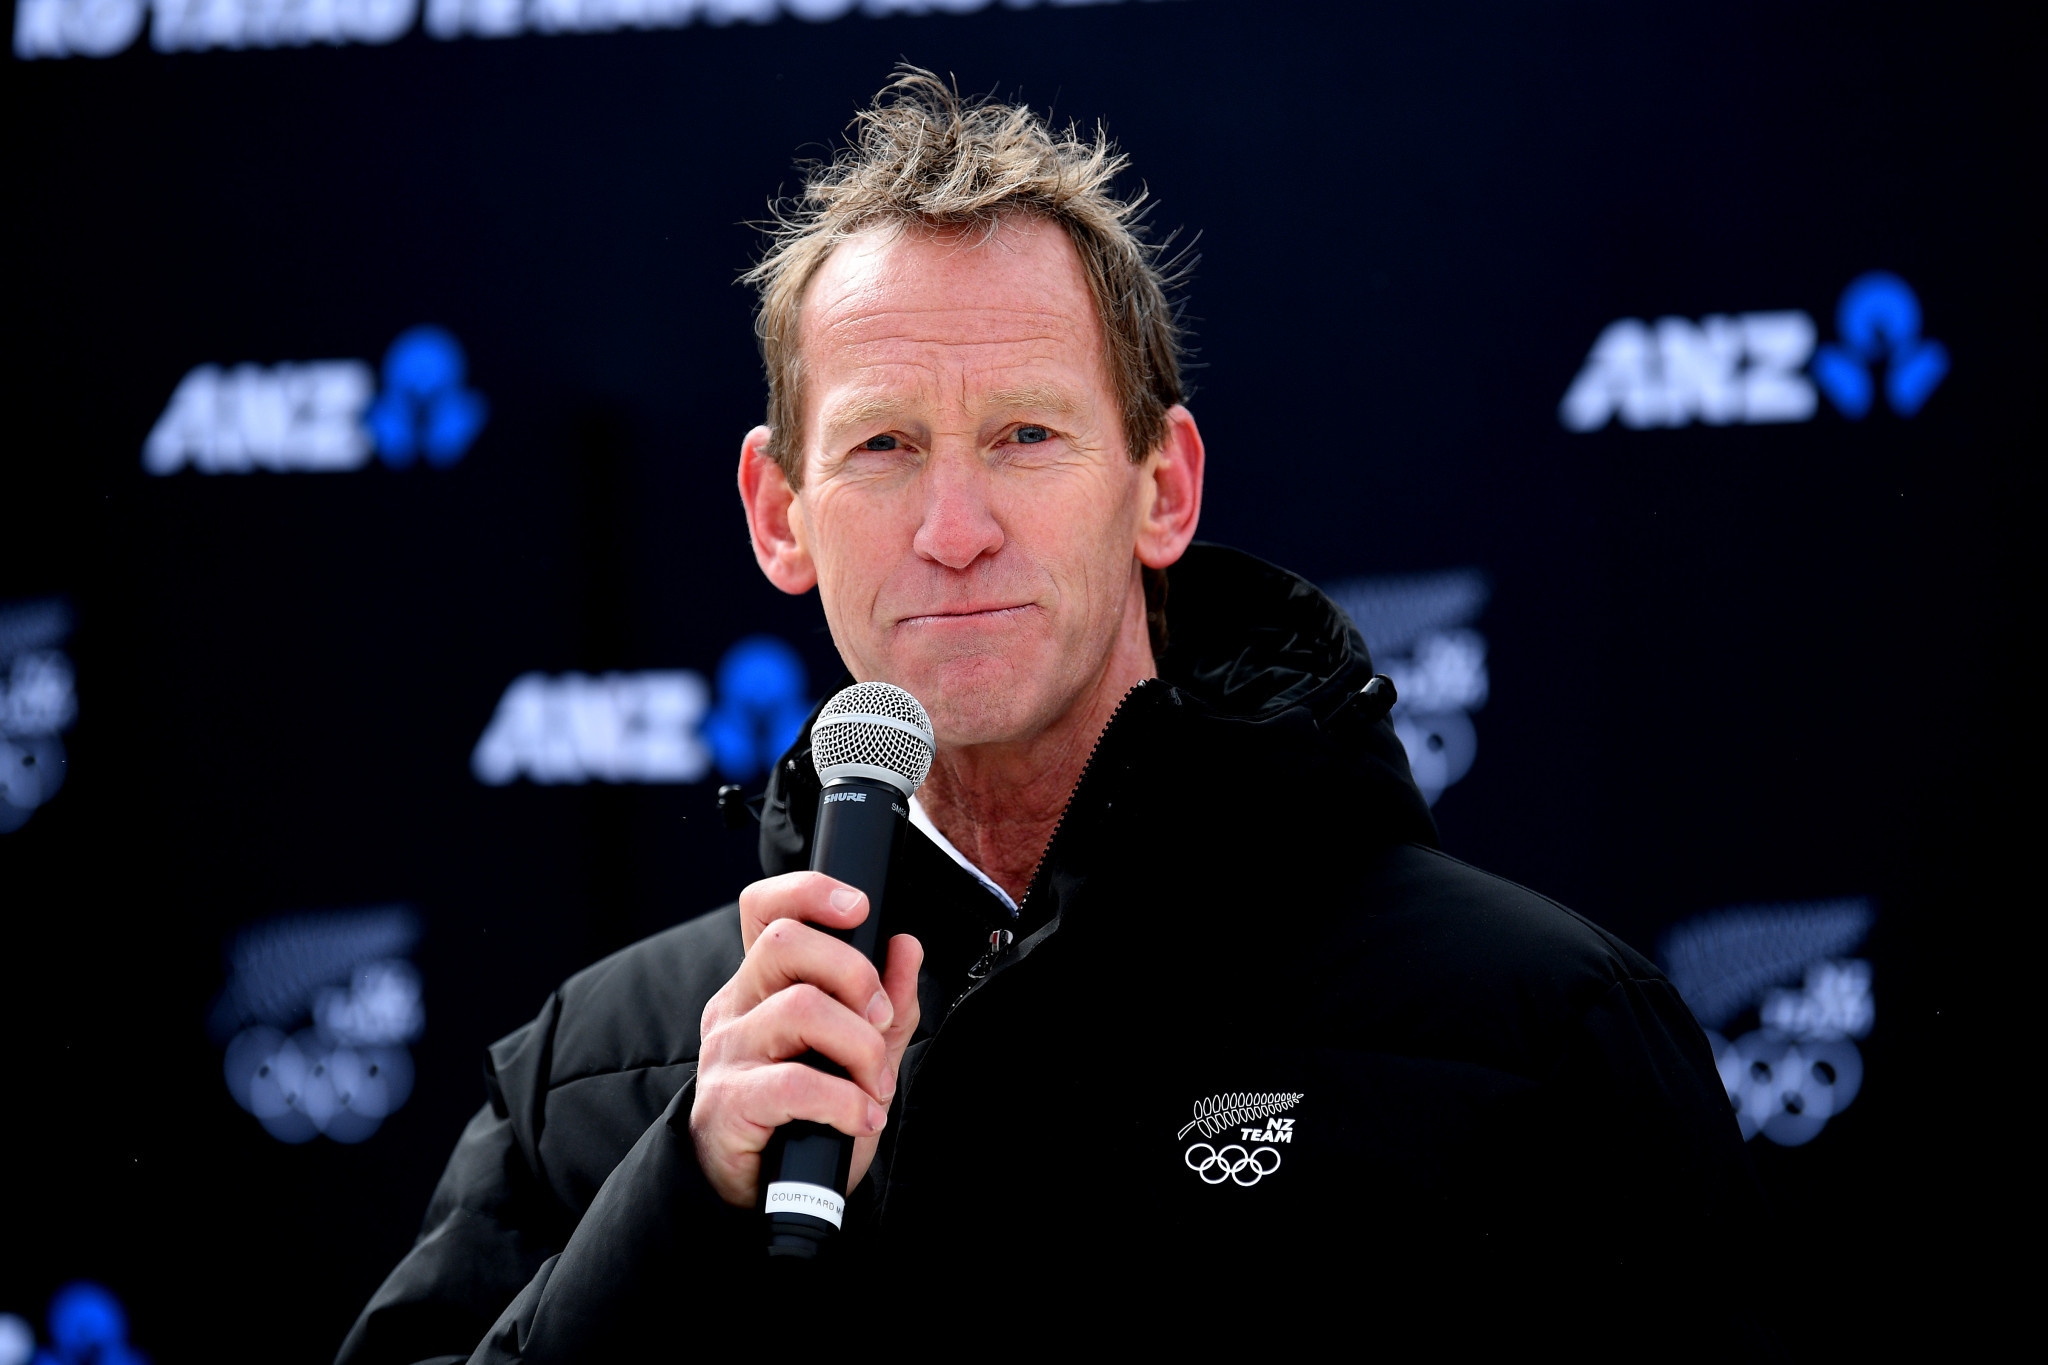 Marty Toomey has been appointed as New Zealand Chef de Mission for Milan Cortina 2026 ©Getty Images